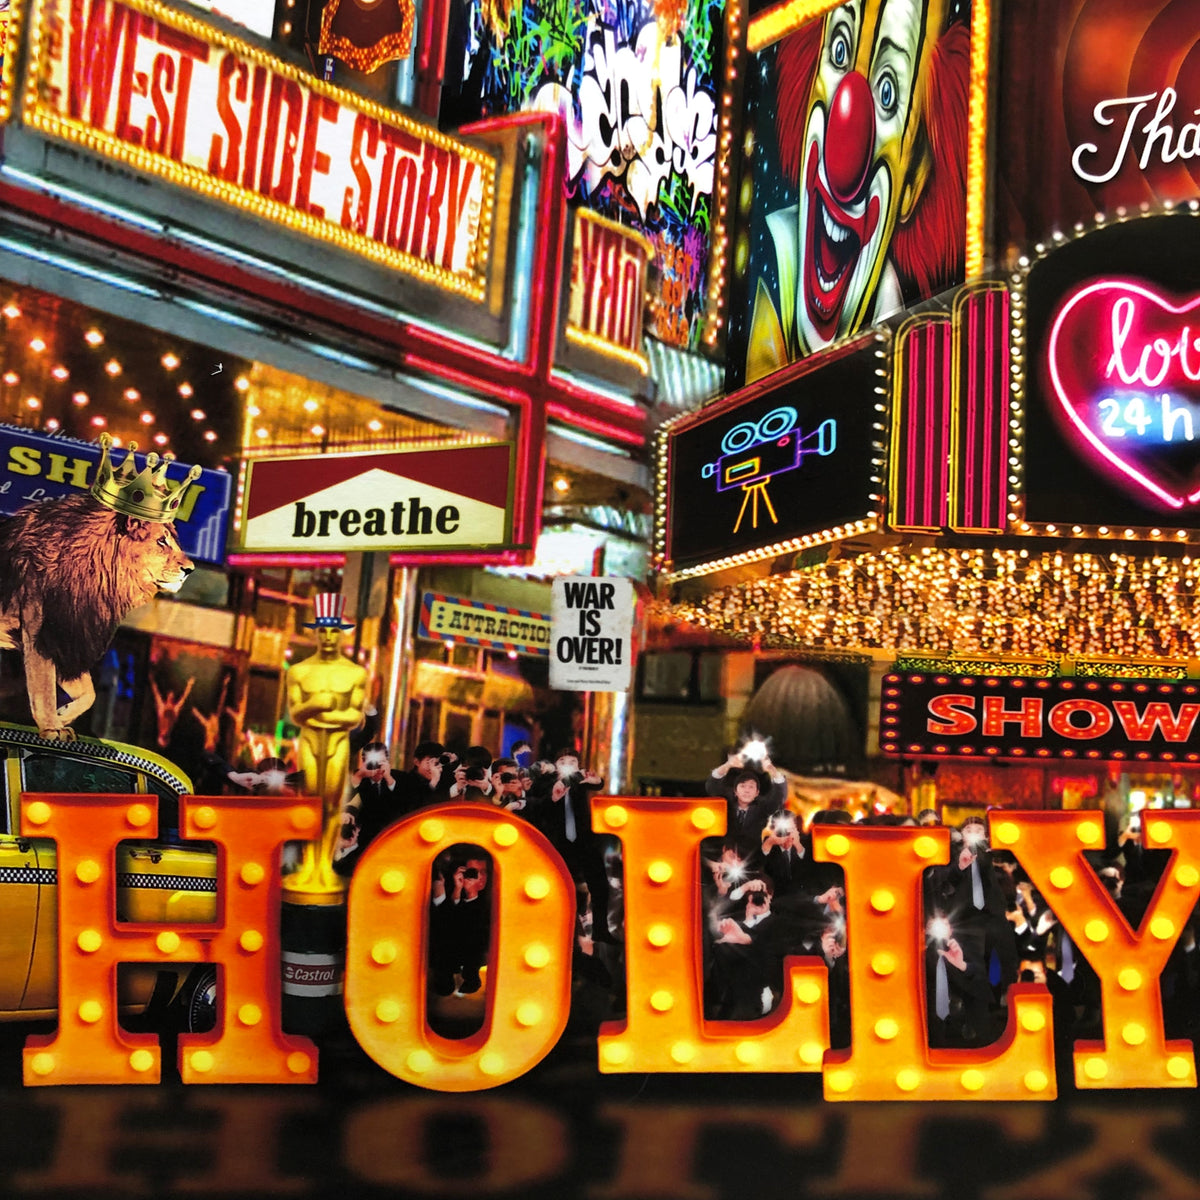 Hollywood Glamour by Dirty Hans